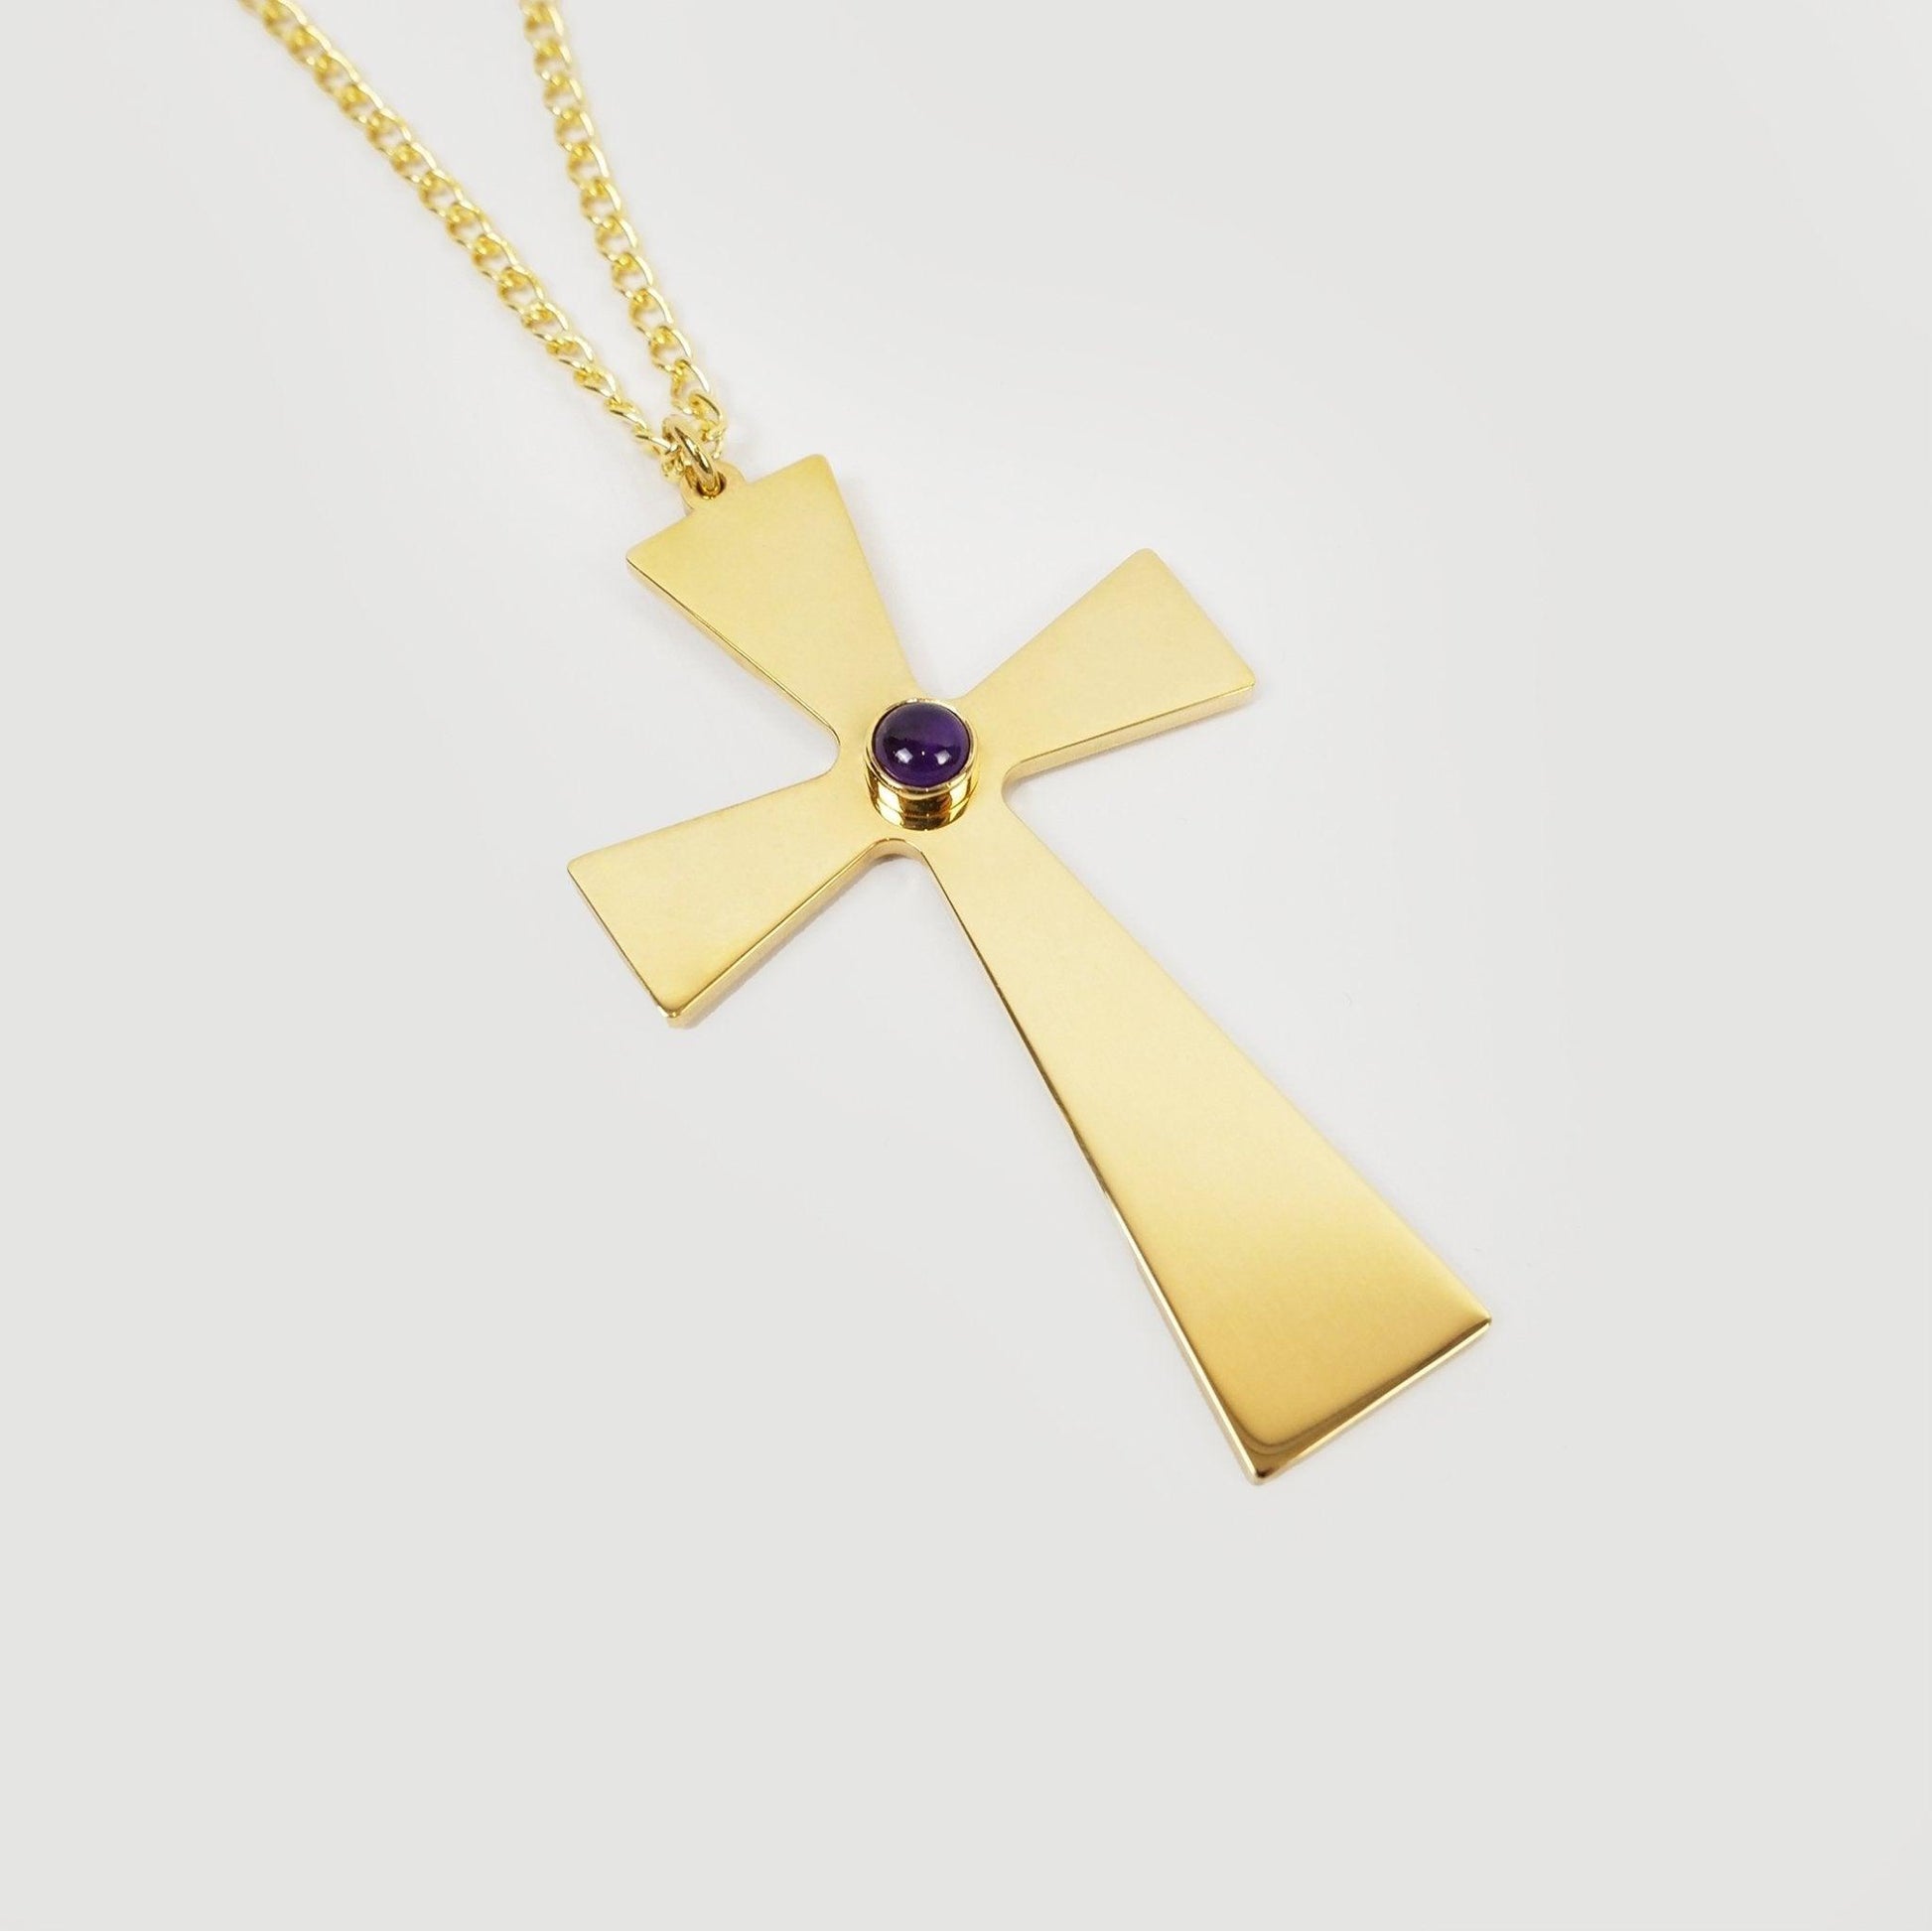 3" gold plated pectoral cross with amethyst - Watts & Co.